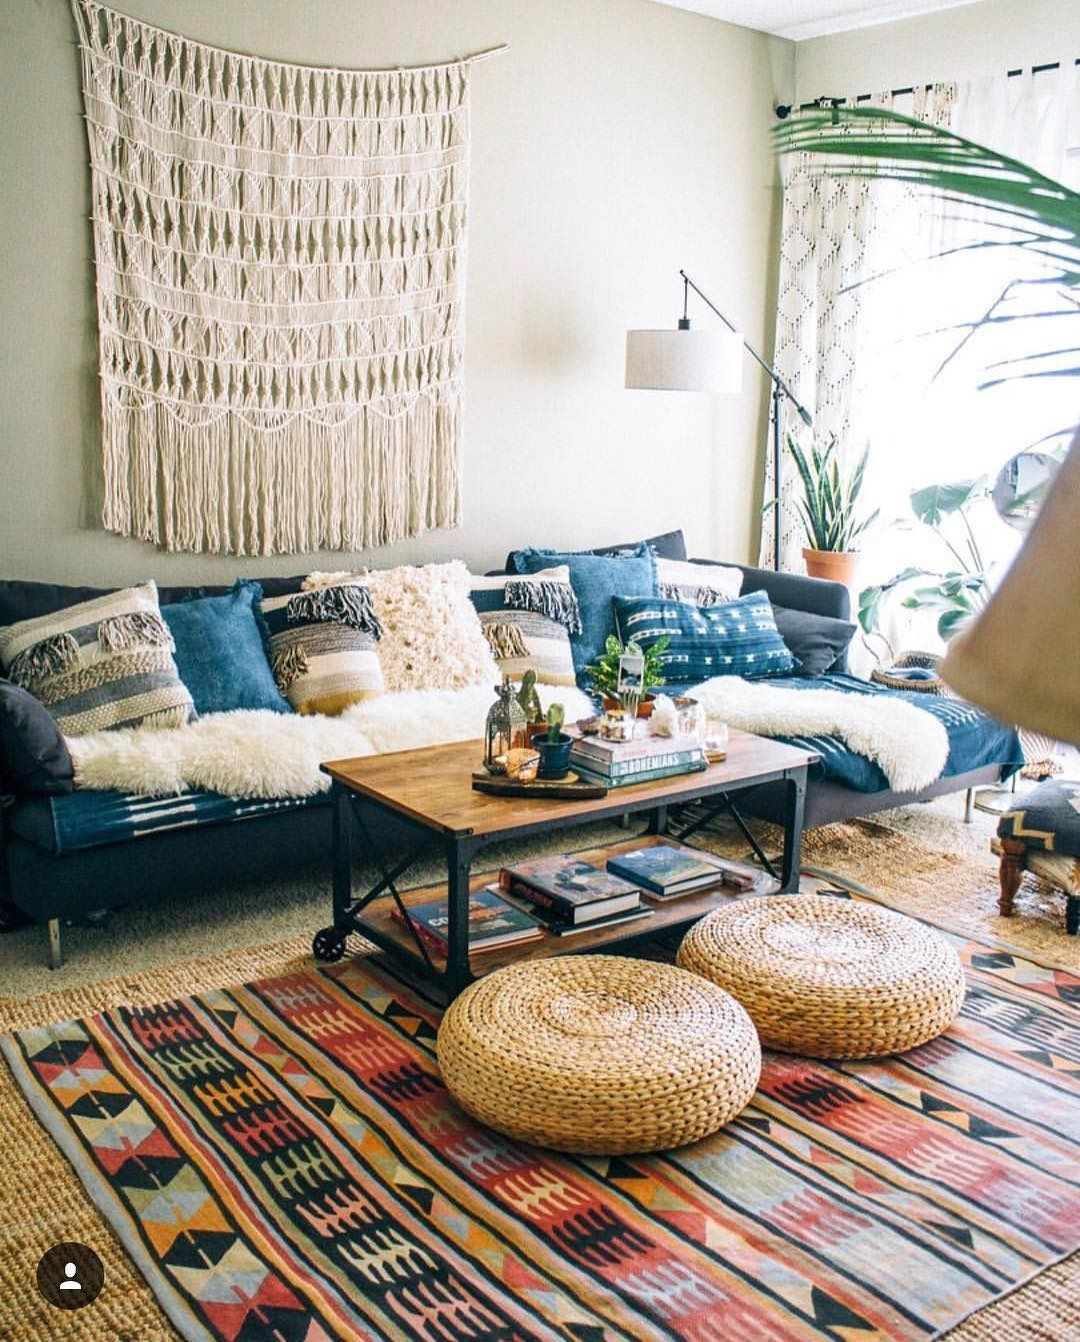 Modern Bohemian Living Room
 27 Chic Bohemian Interior Design You Will Want To Try